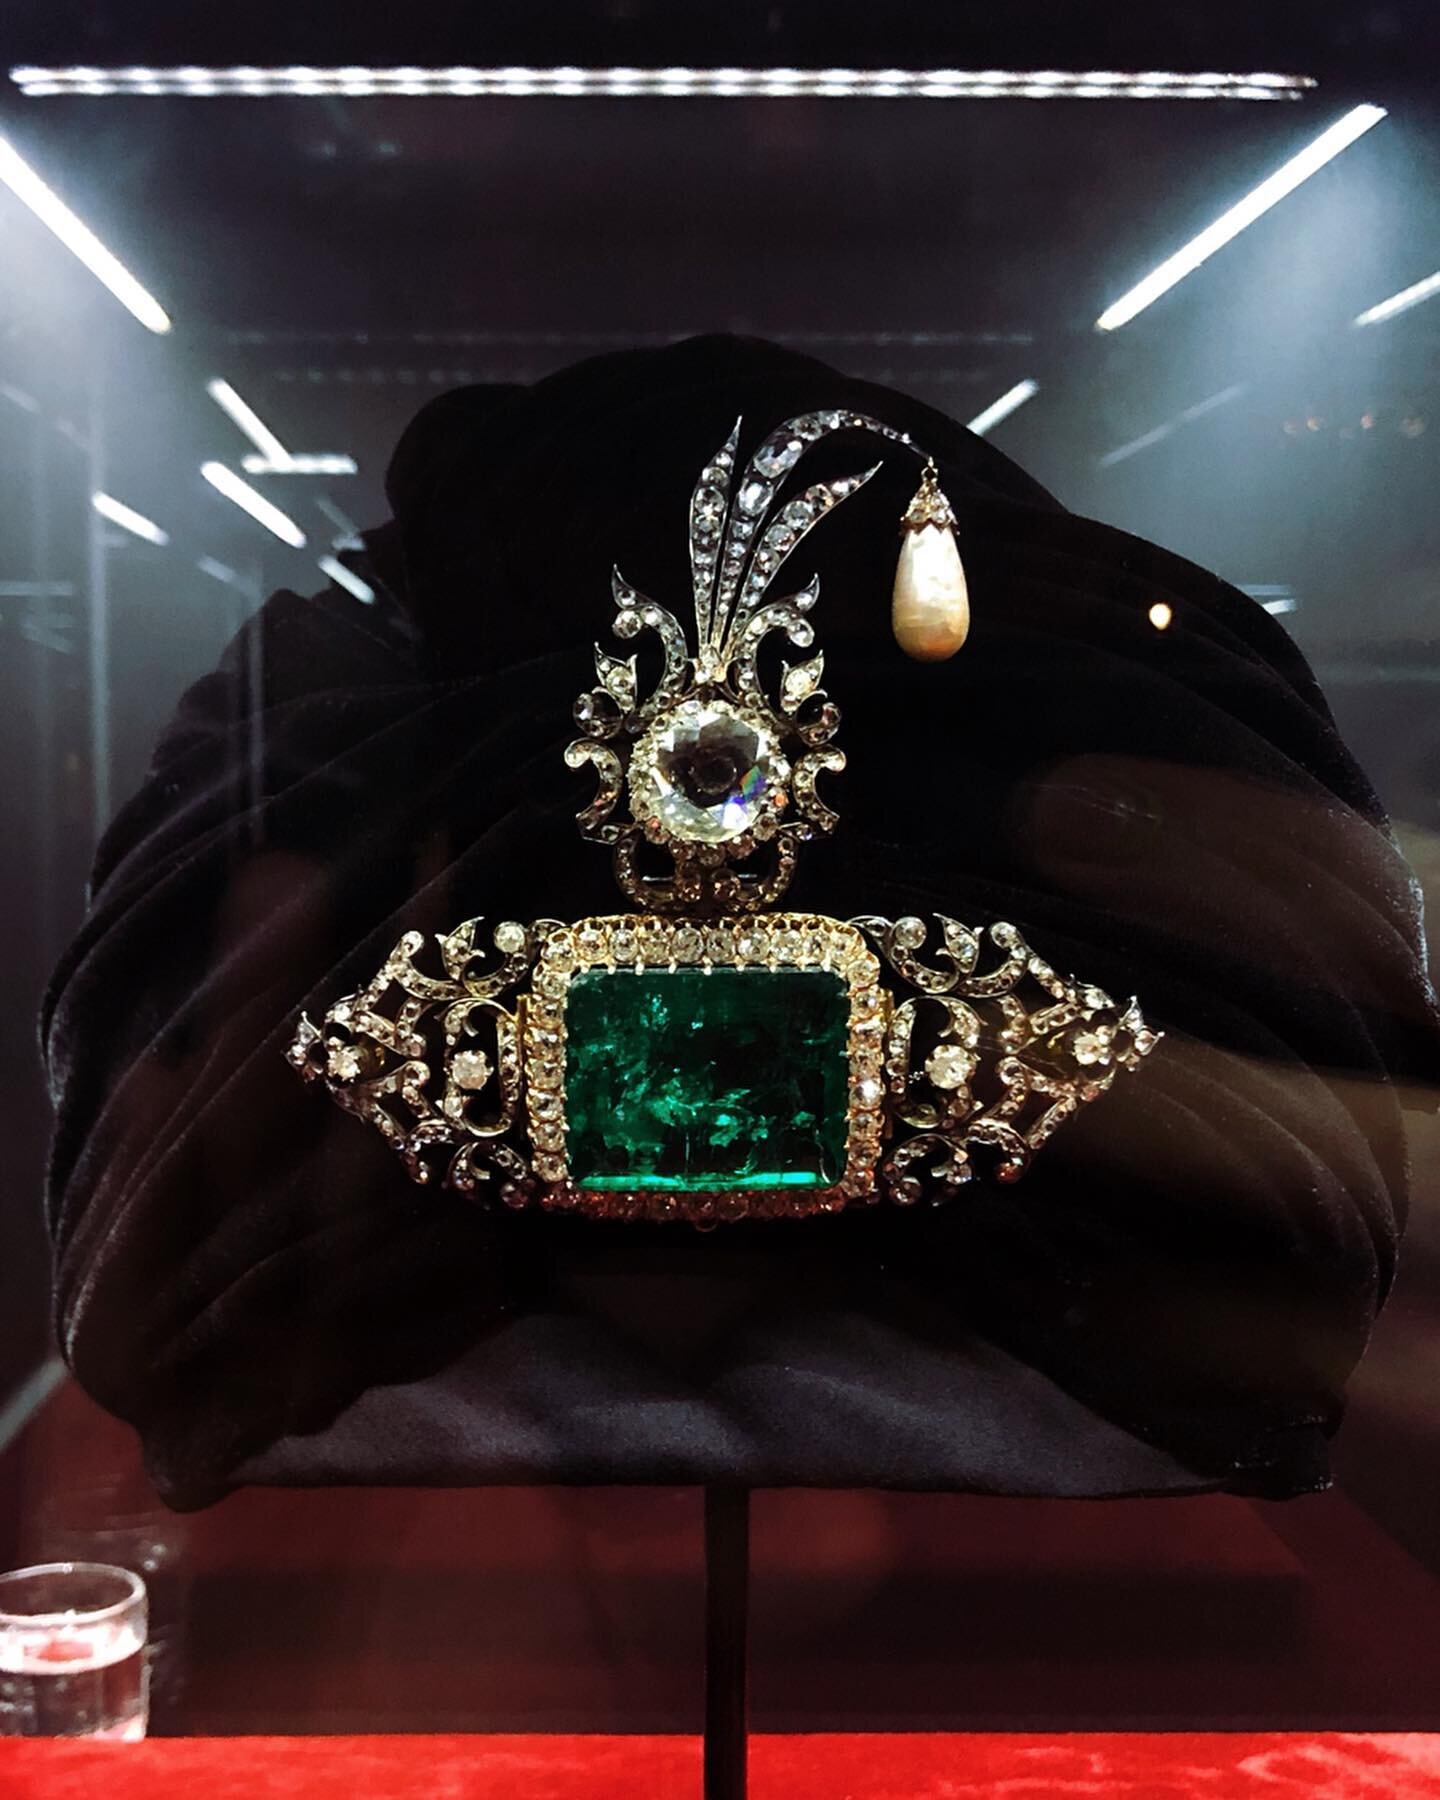 Weekends are for the jewels...
.
.
&ldquo;Maharajah and Mughal Magnificence&rdquo; .
.
.
#christies #treasure #jewels #emerald #ruby #diamond #pearl